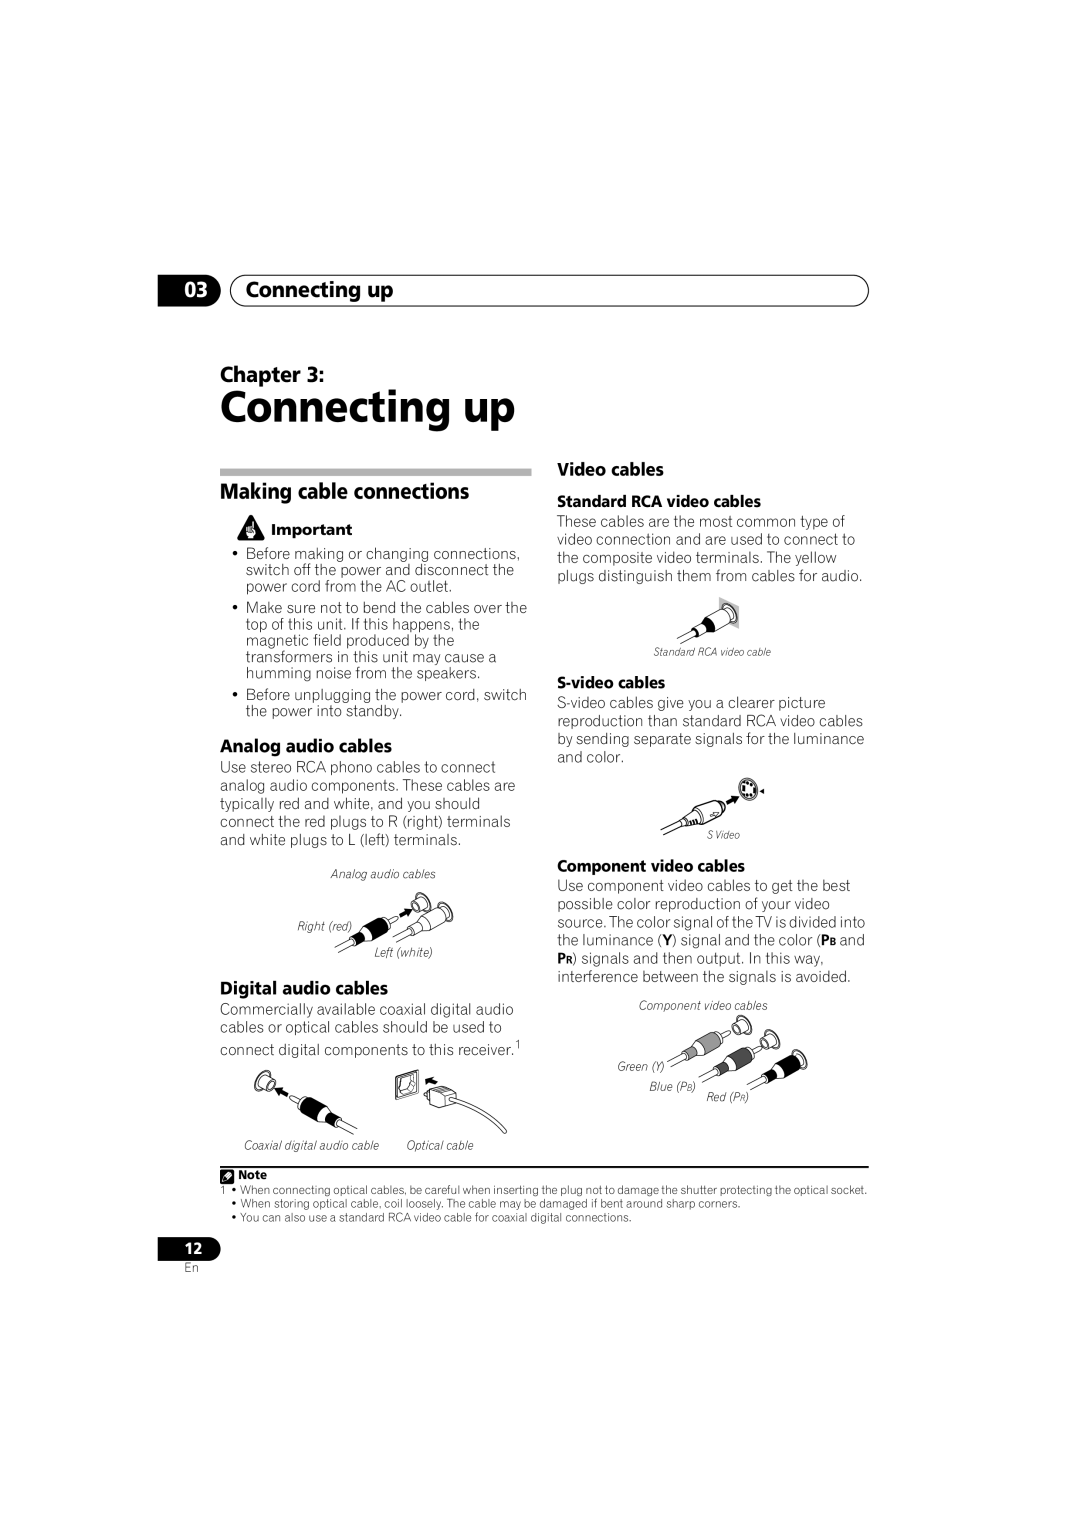 Pioneer VSX-917V-S/-K manual 03Connecting up Chapter, Making cable connections, Analog audio cables, Video cables 